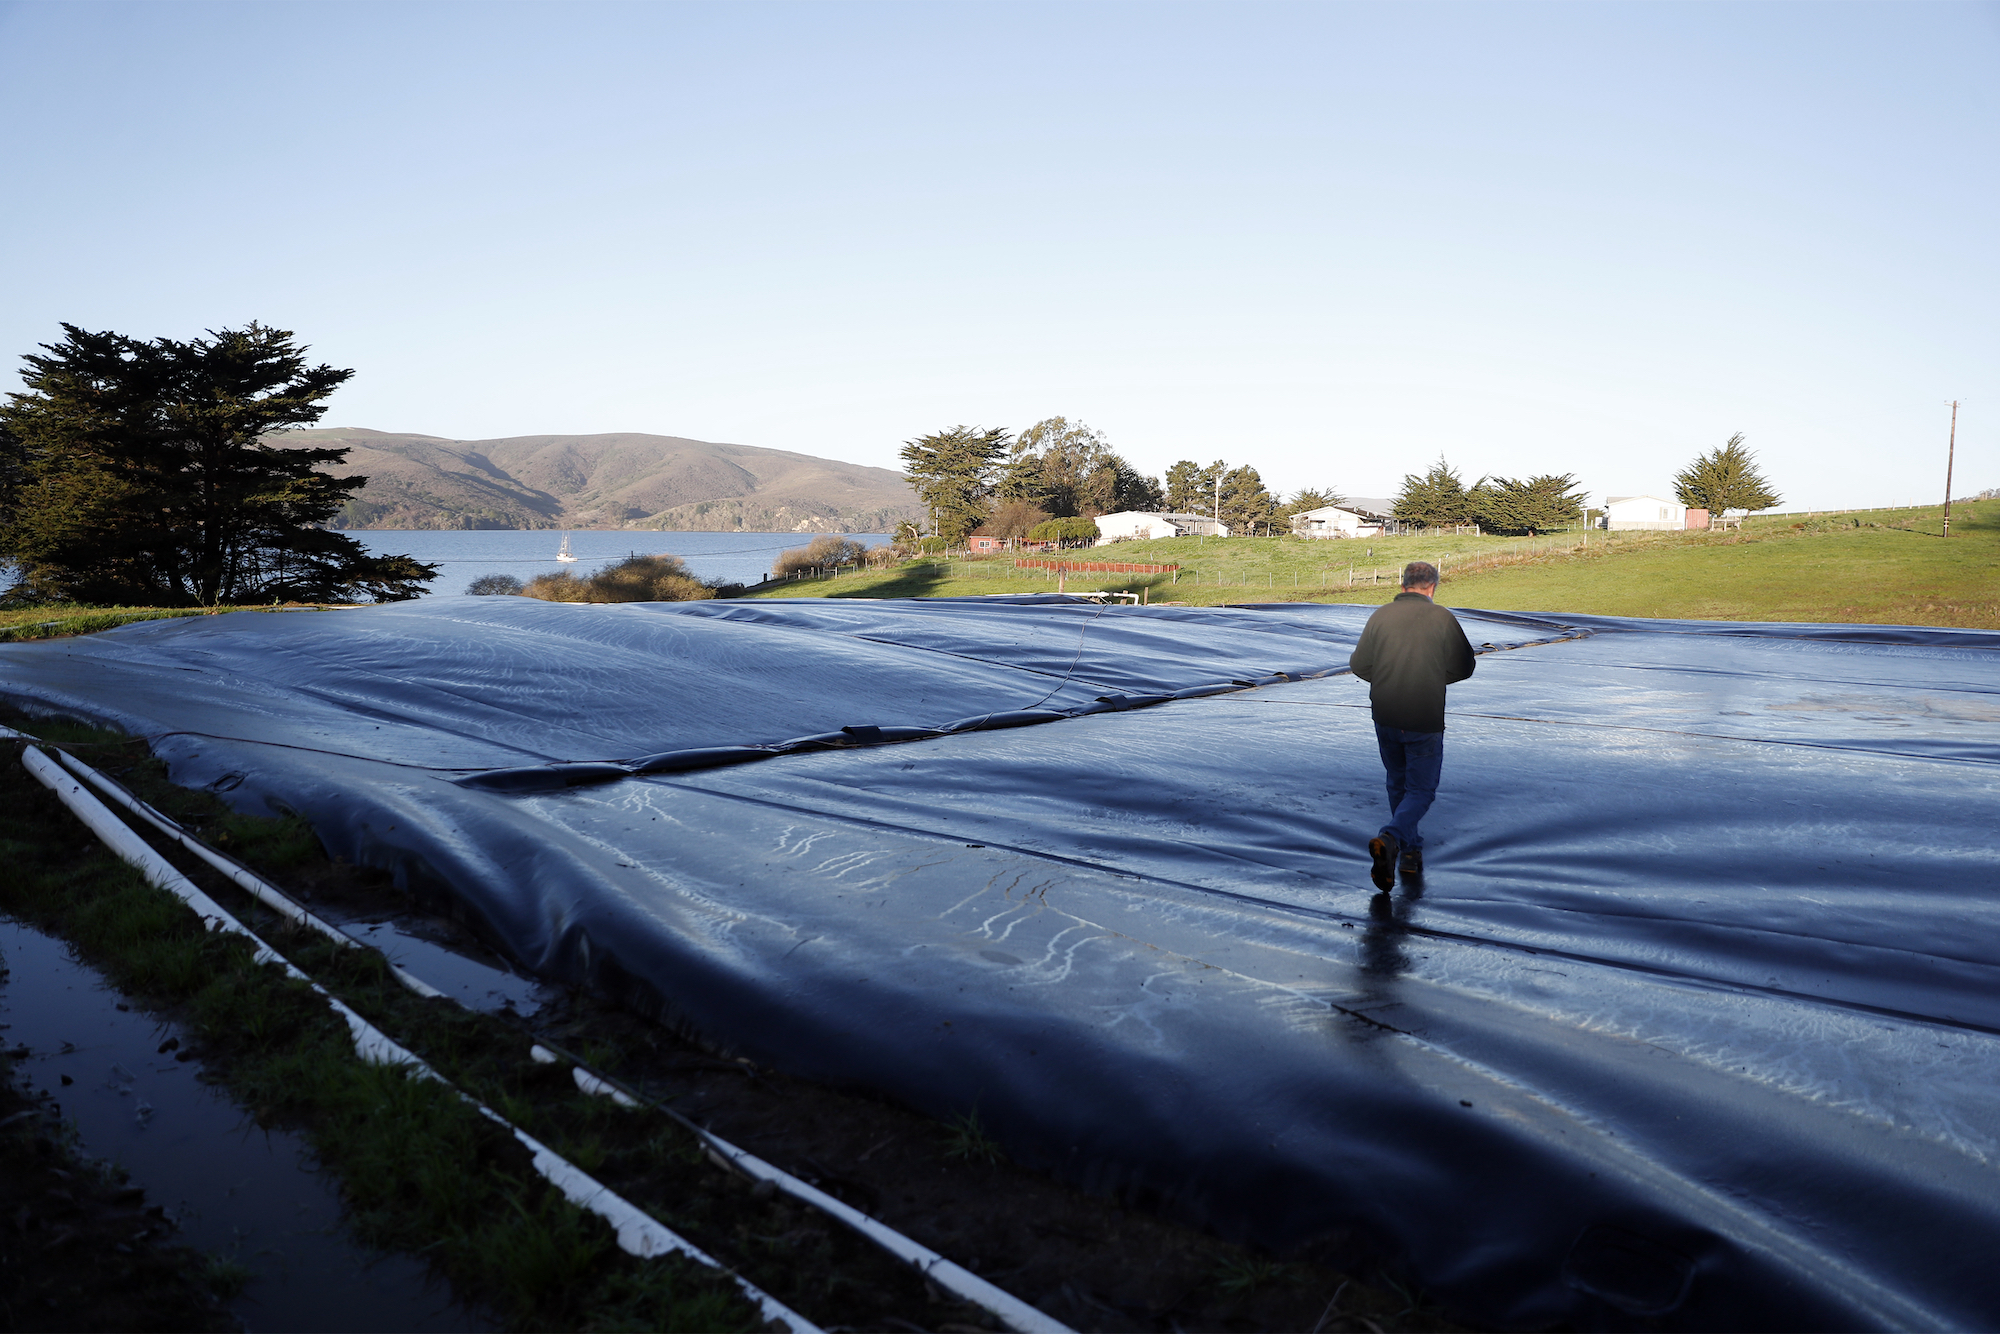 A man dressed with black plants and a black jacket walks over a giant black plastic bag, where methane is being stored. You can see mountains in the background, a clear, blue sky, and a couple of trees.